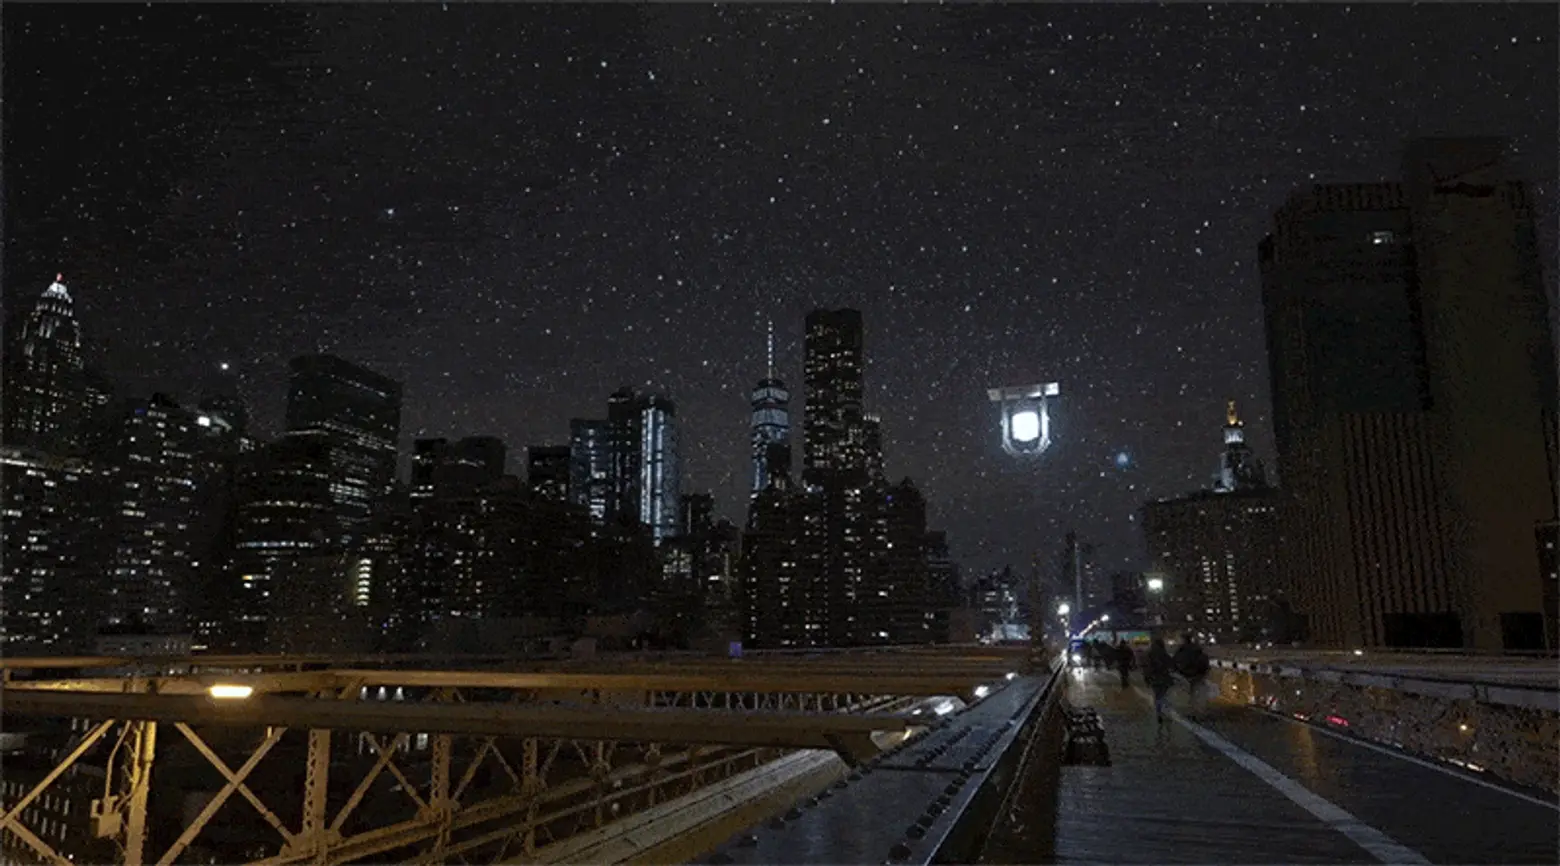 See how NYC’s skies would look with stars if there was no light pollution